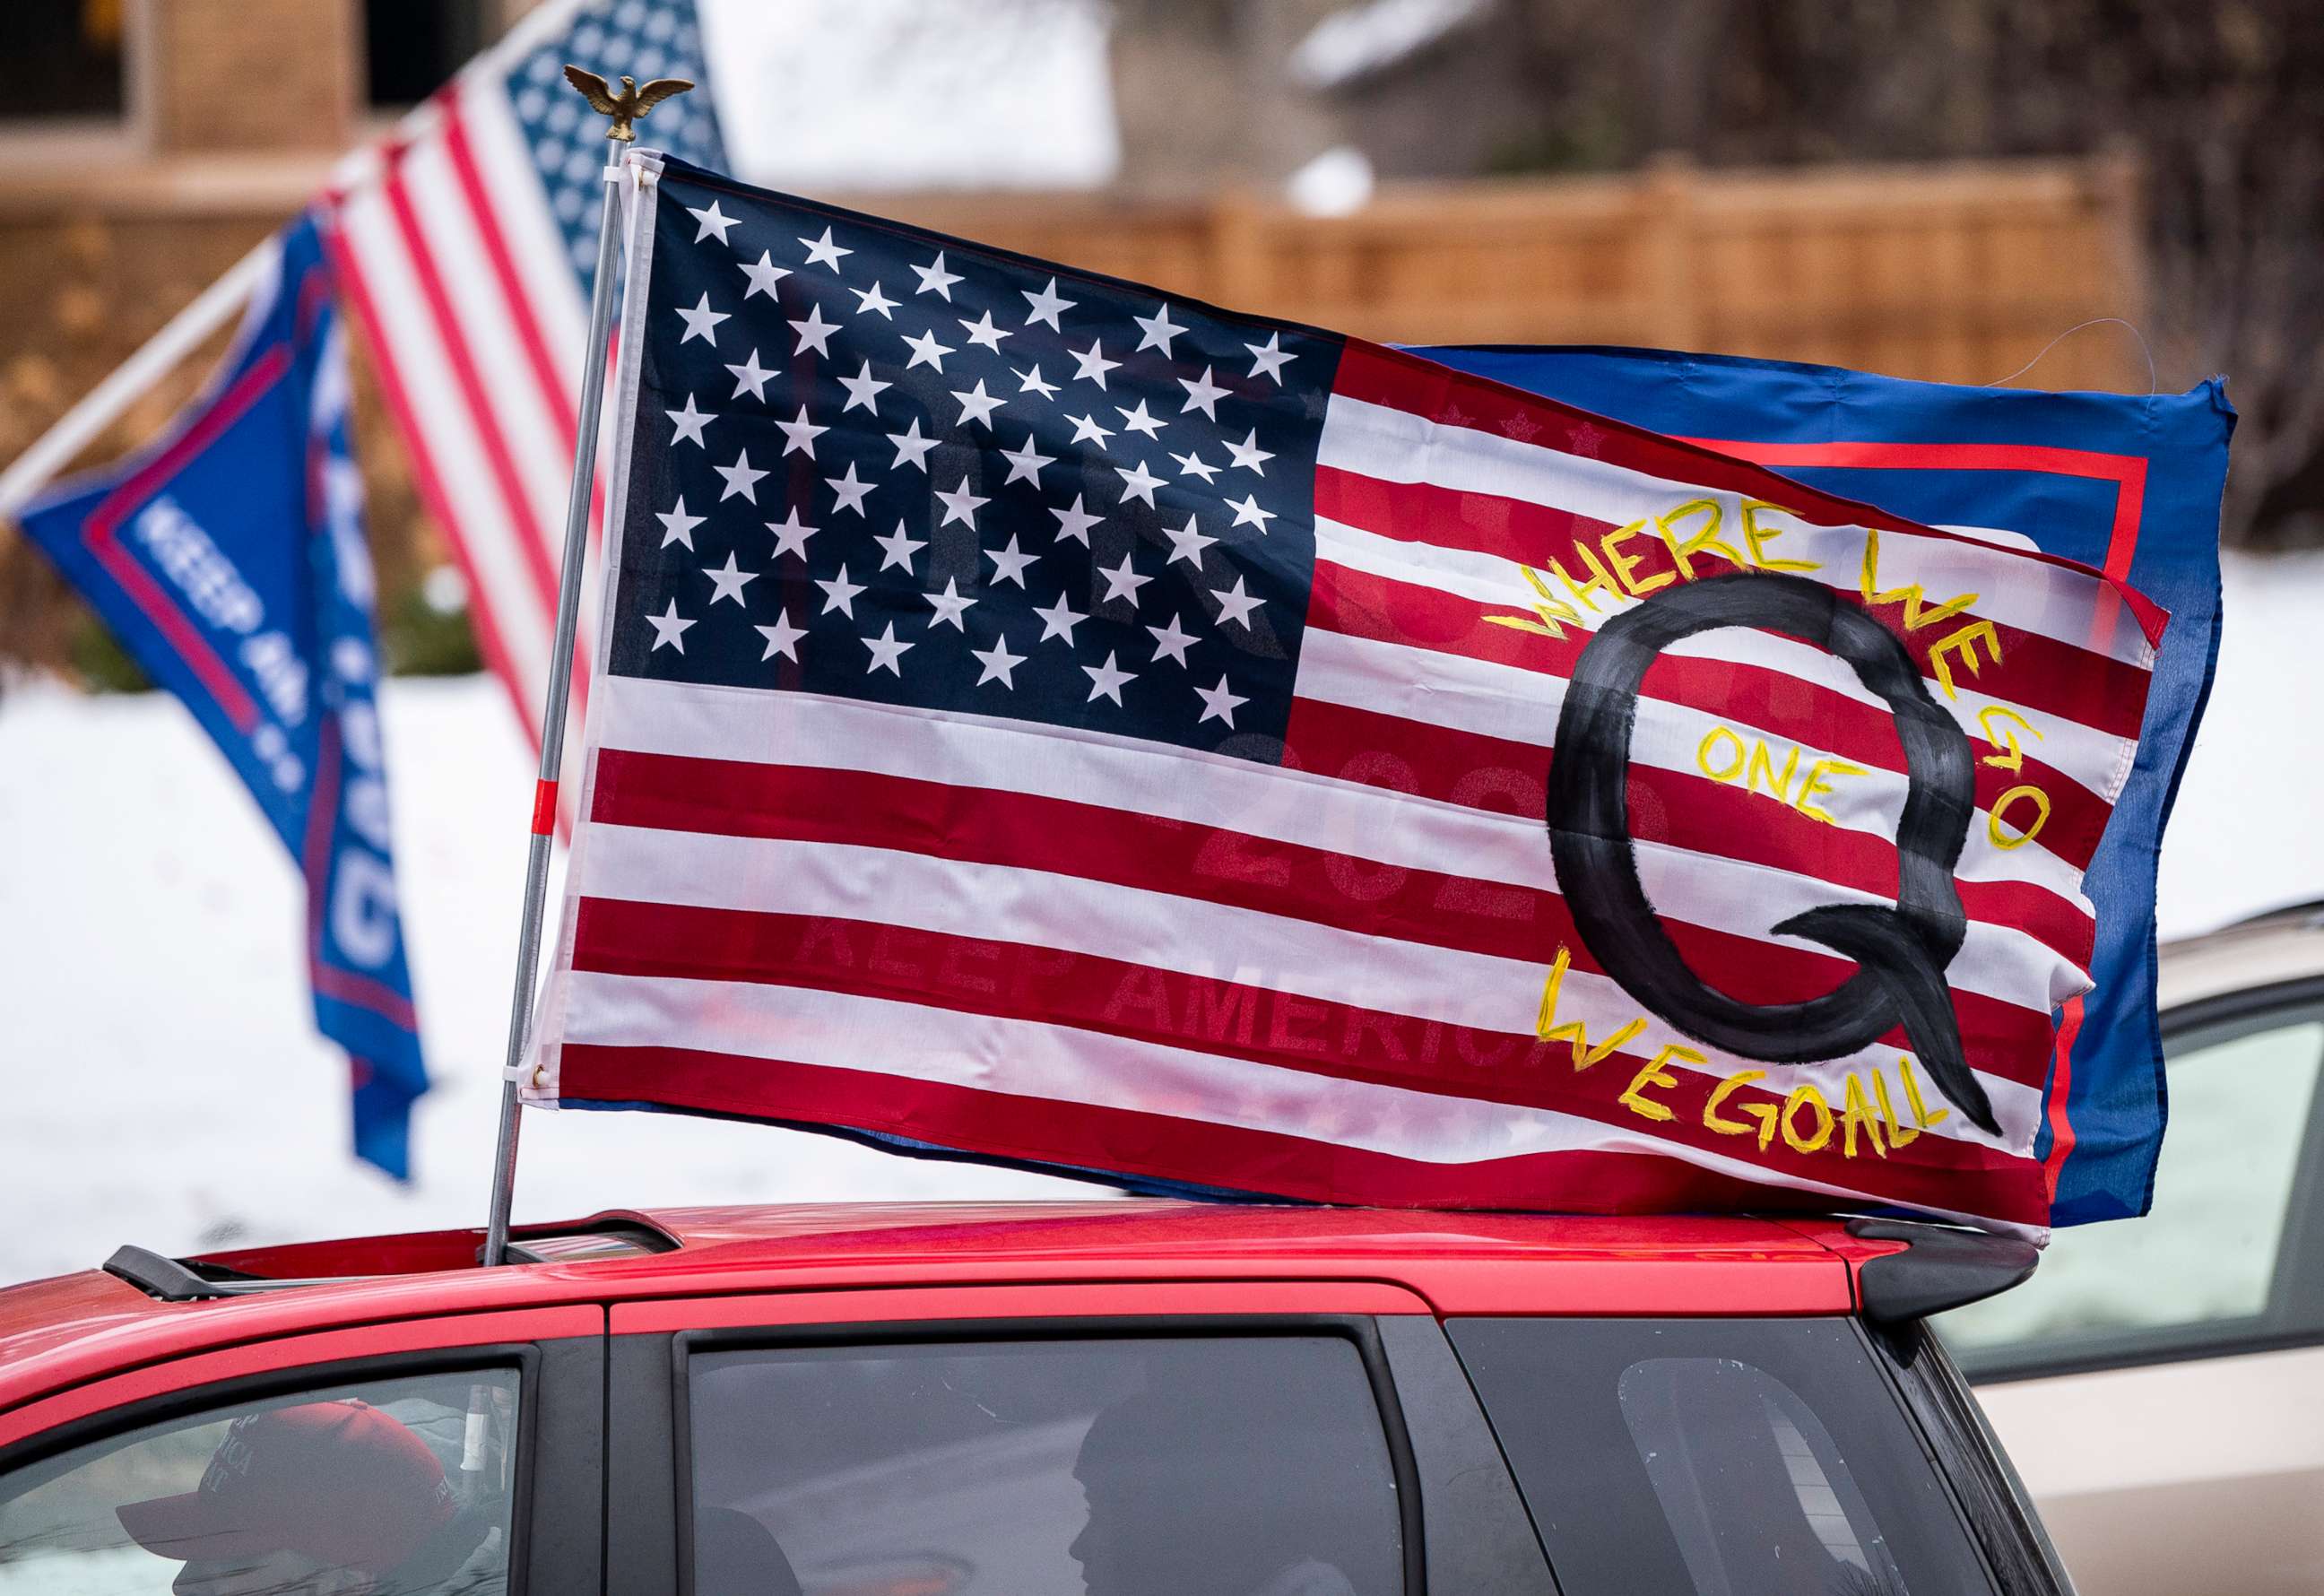 PHOTO: A car with a flag endorsing the QAnon drives by as supporters of President Donald Trump gather for a rally, Nov. 14, 2020, in St. Paul, Minn.